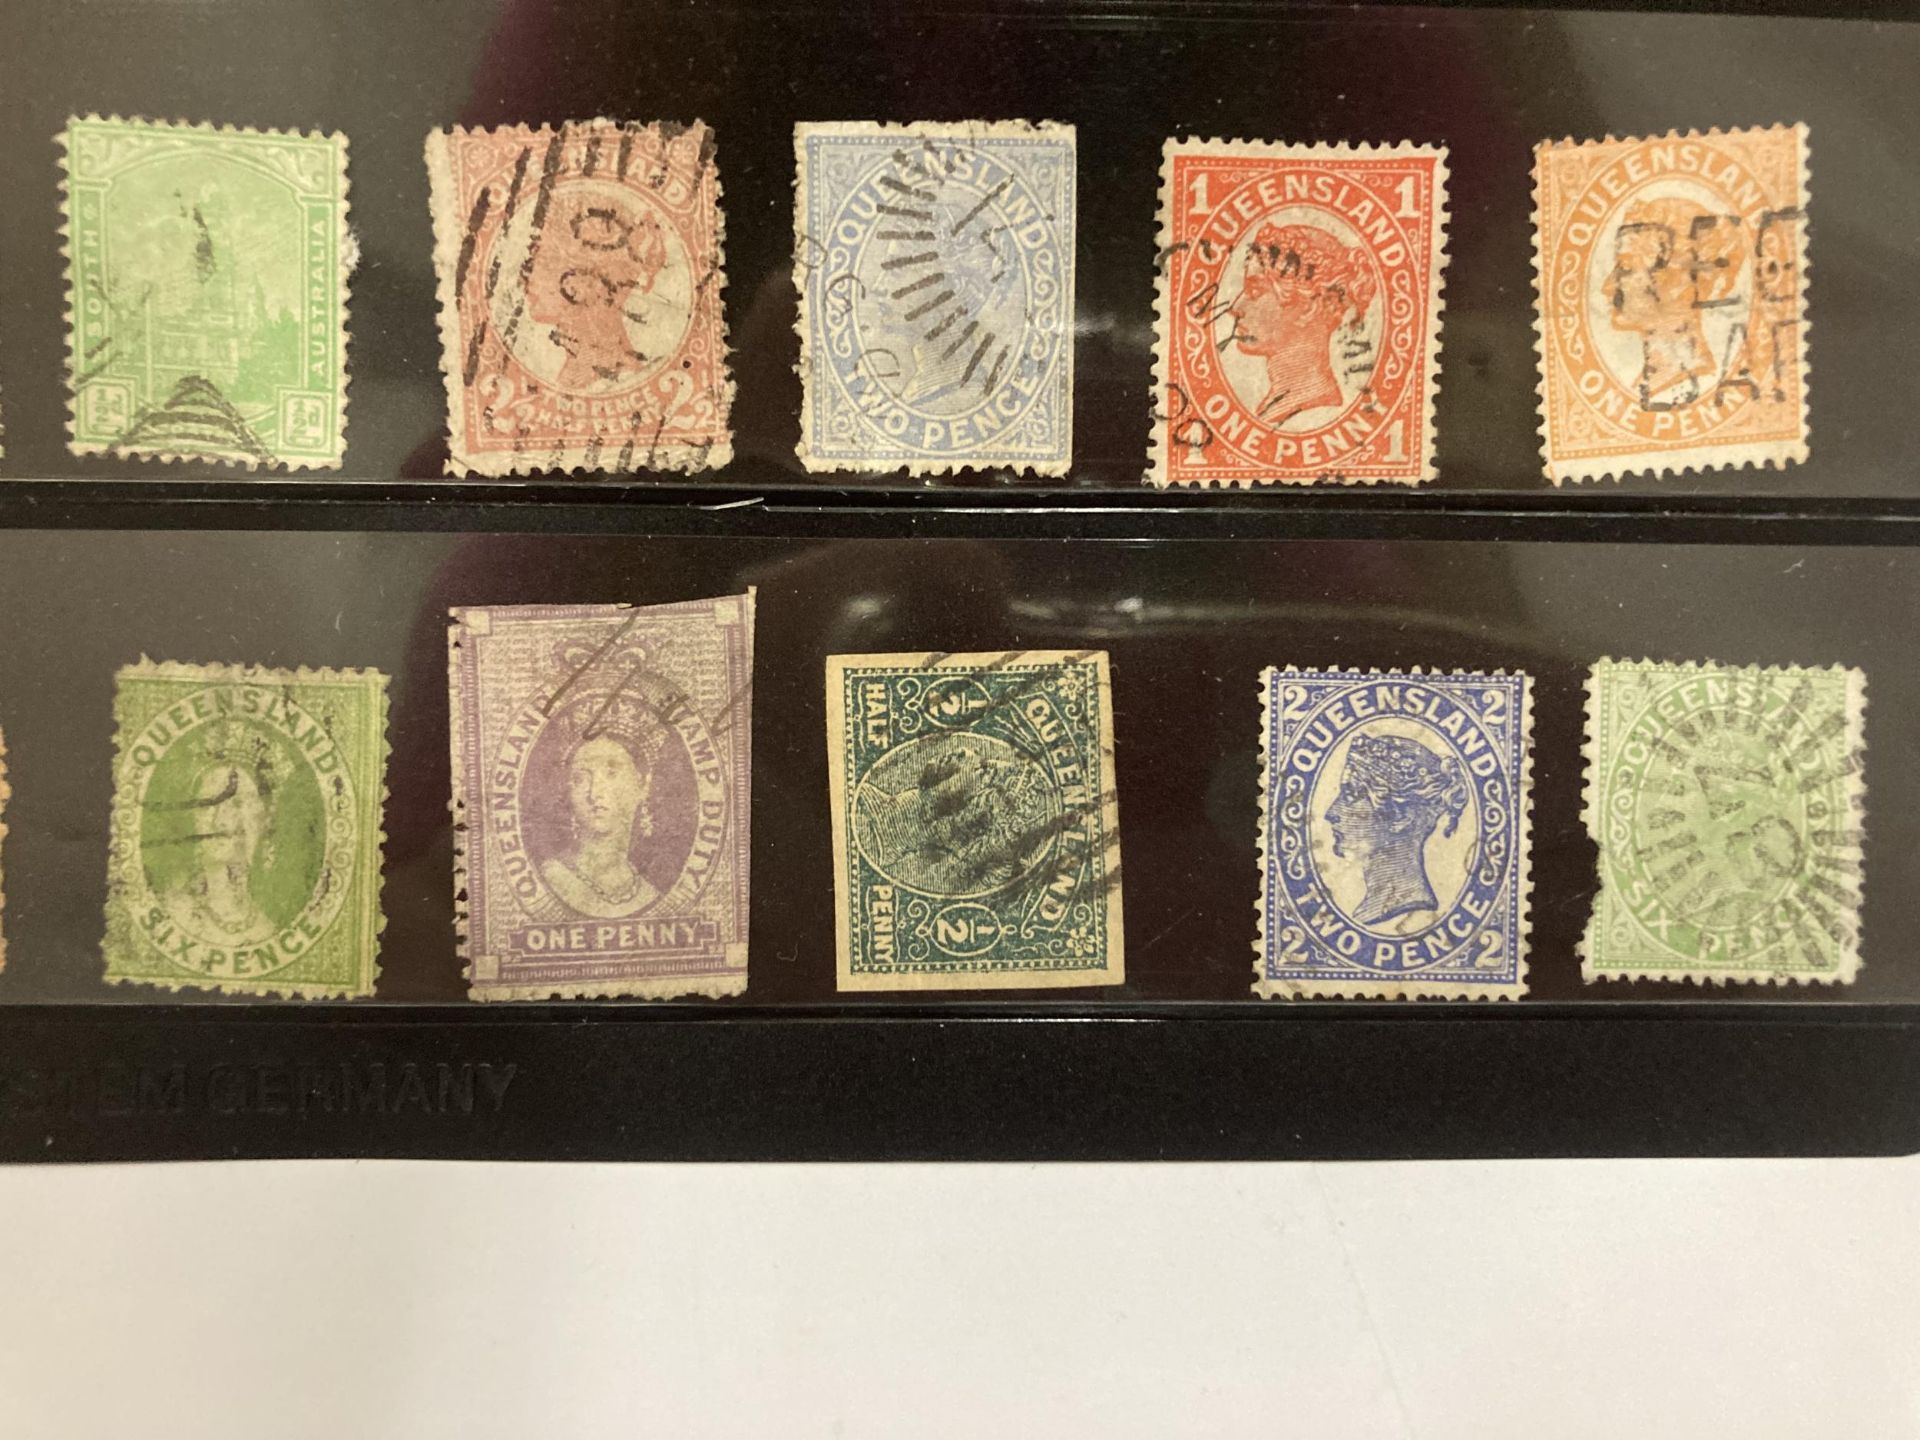 A SLEEVE OF AUSTRALIAN VICTORIA STATE STAMPS - Image 2 of 2